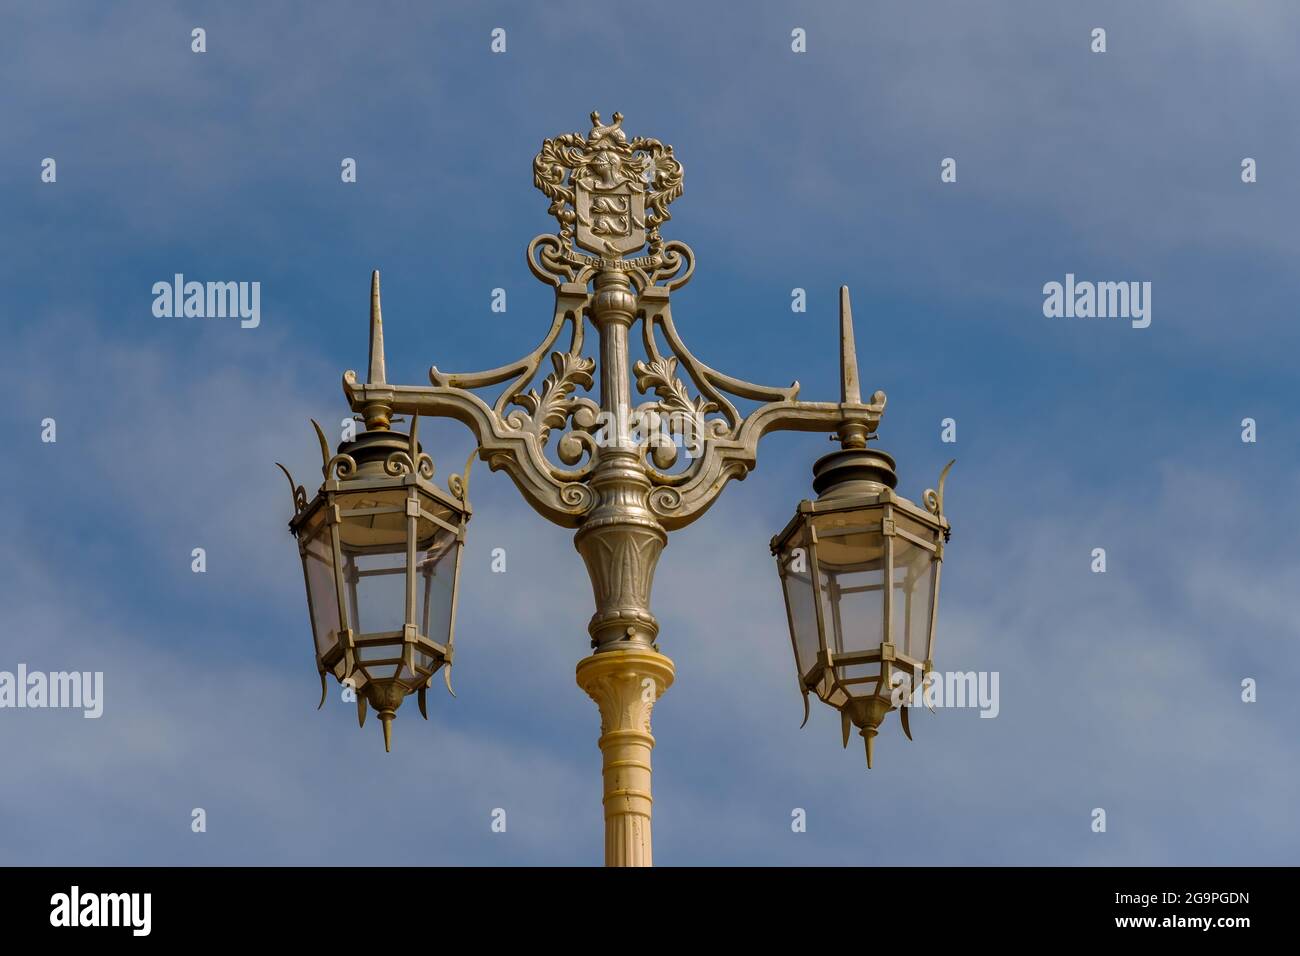 An ornate victorian street lamps on the seafront in Brighton, Sussex, England, UK against a cloudy blue sky. Stock Photo